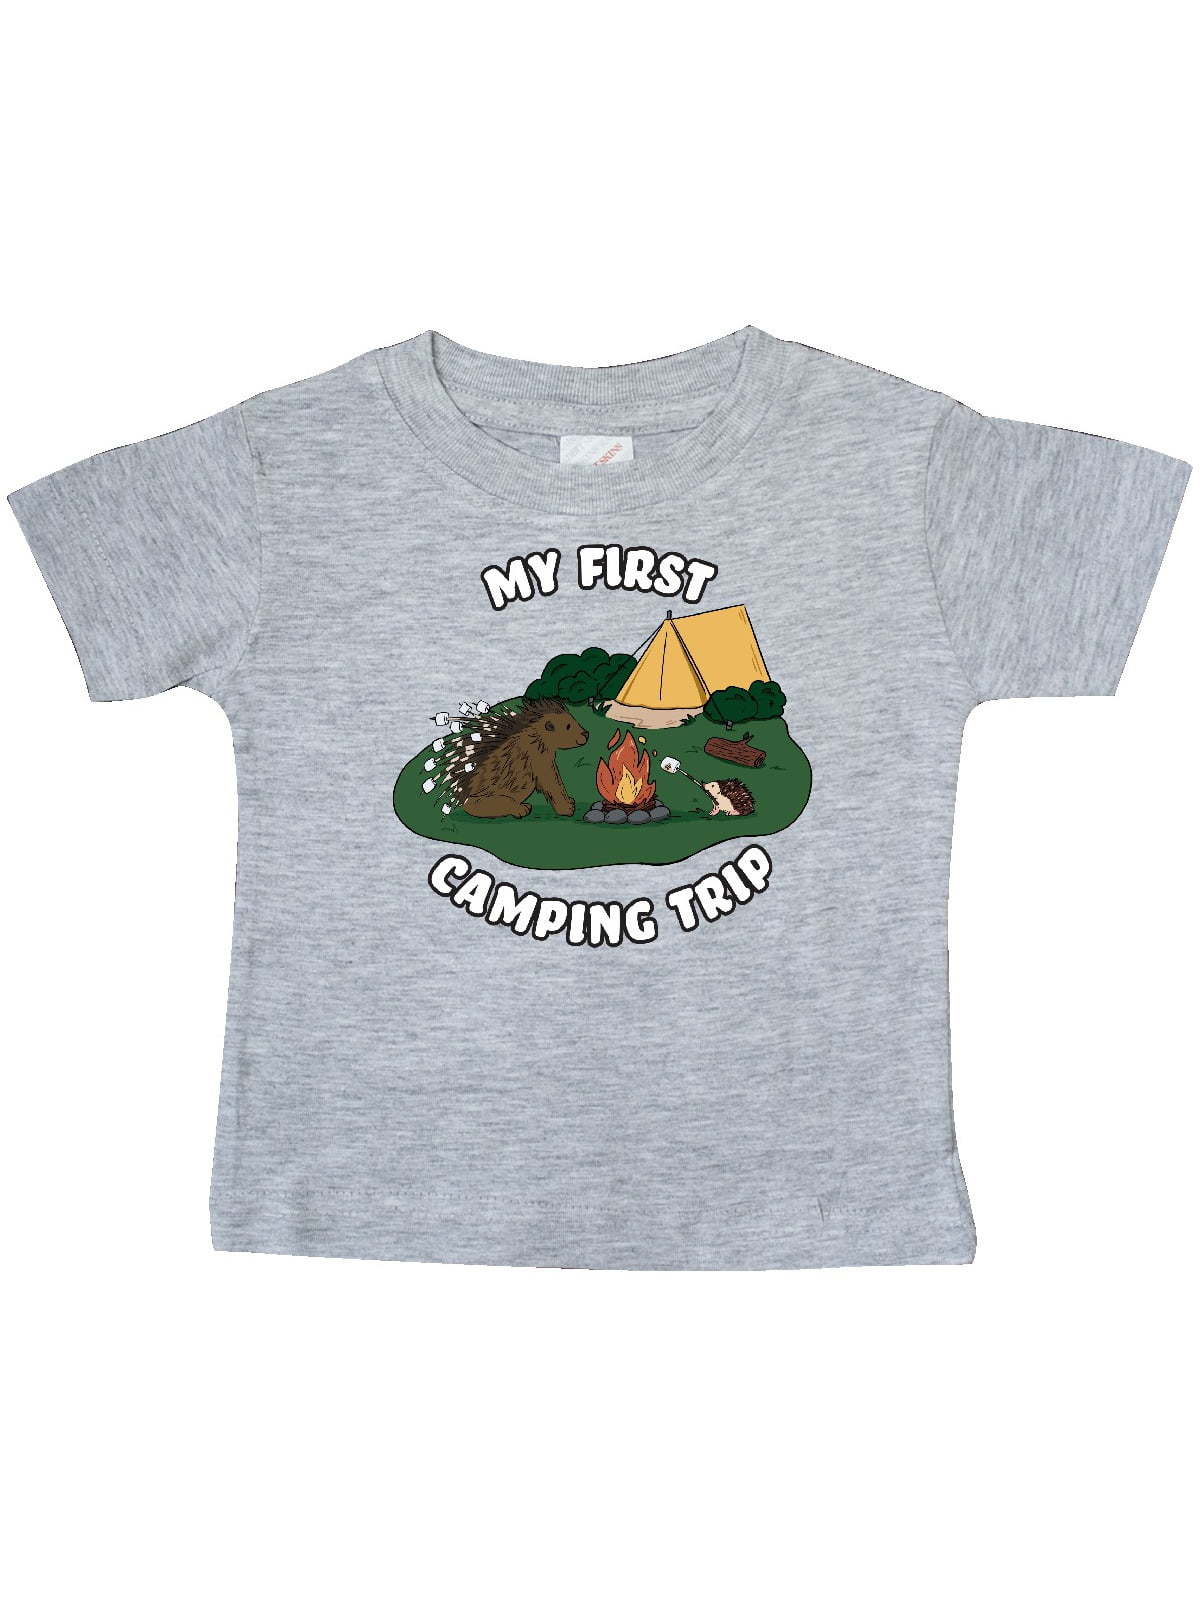 inktastic My 1st Camping Trip Baby T-Shirt